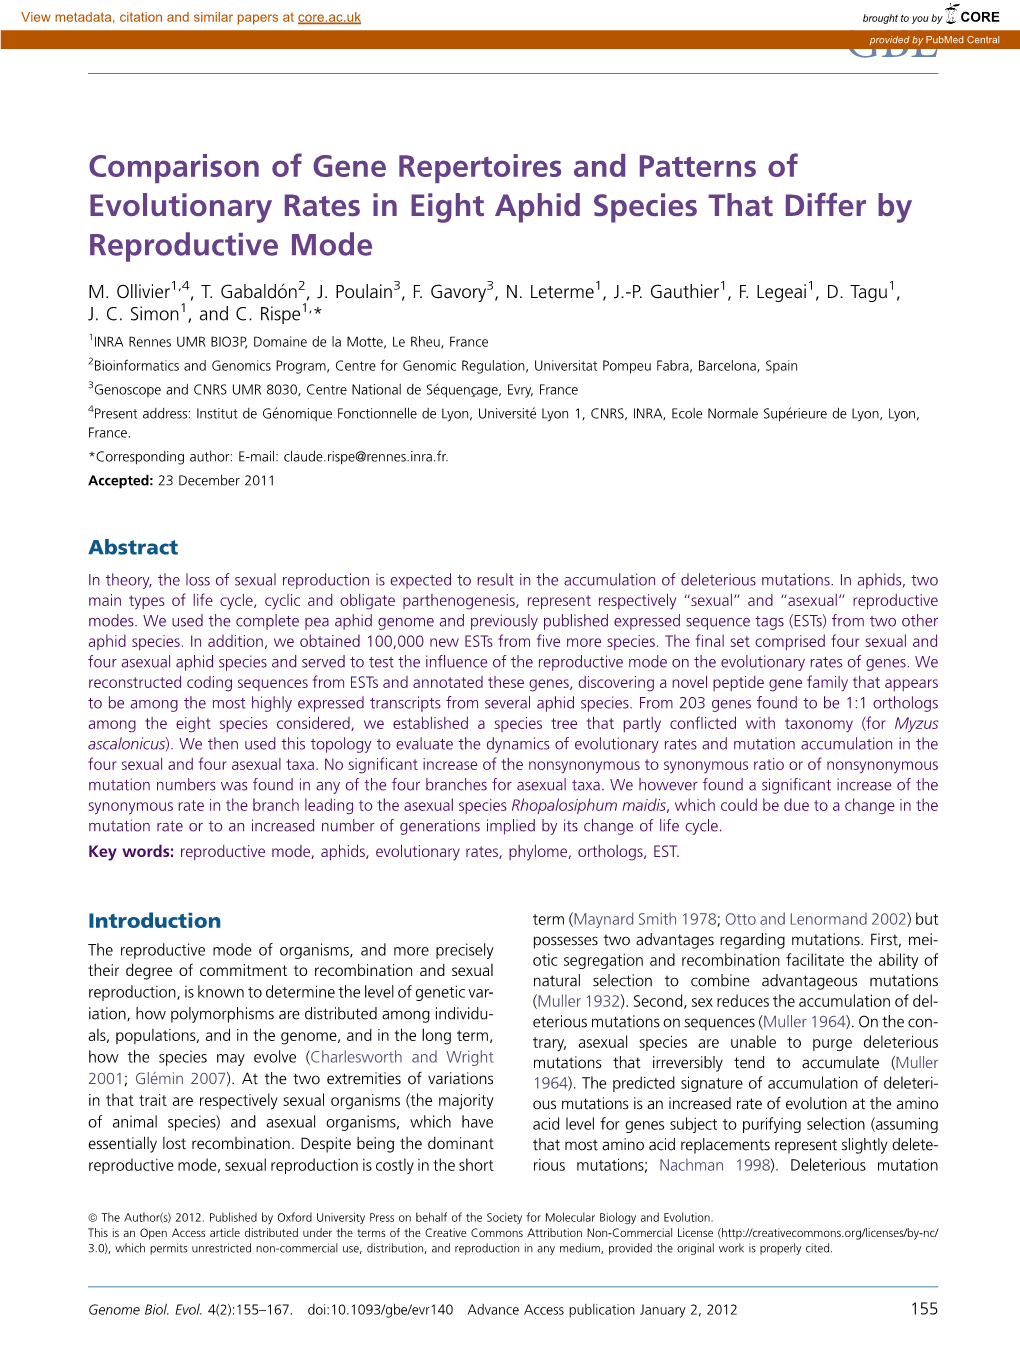 Comparison of Gene Repertoires and Patterns of Evolutionary Rates in Eight Aphid Species That Differ by Reproductive Mode